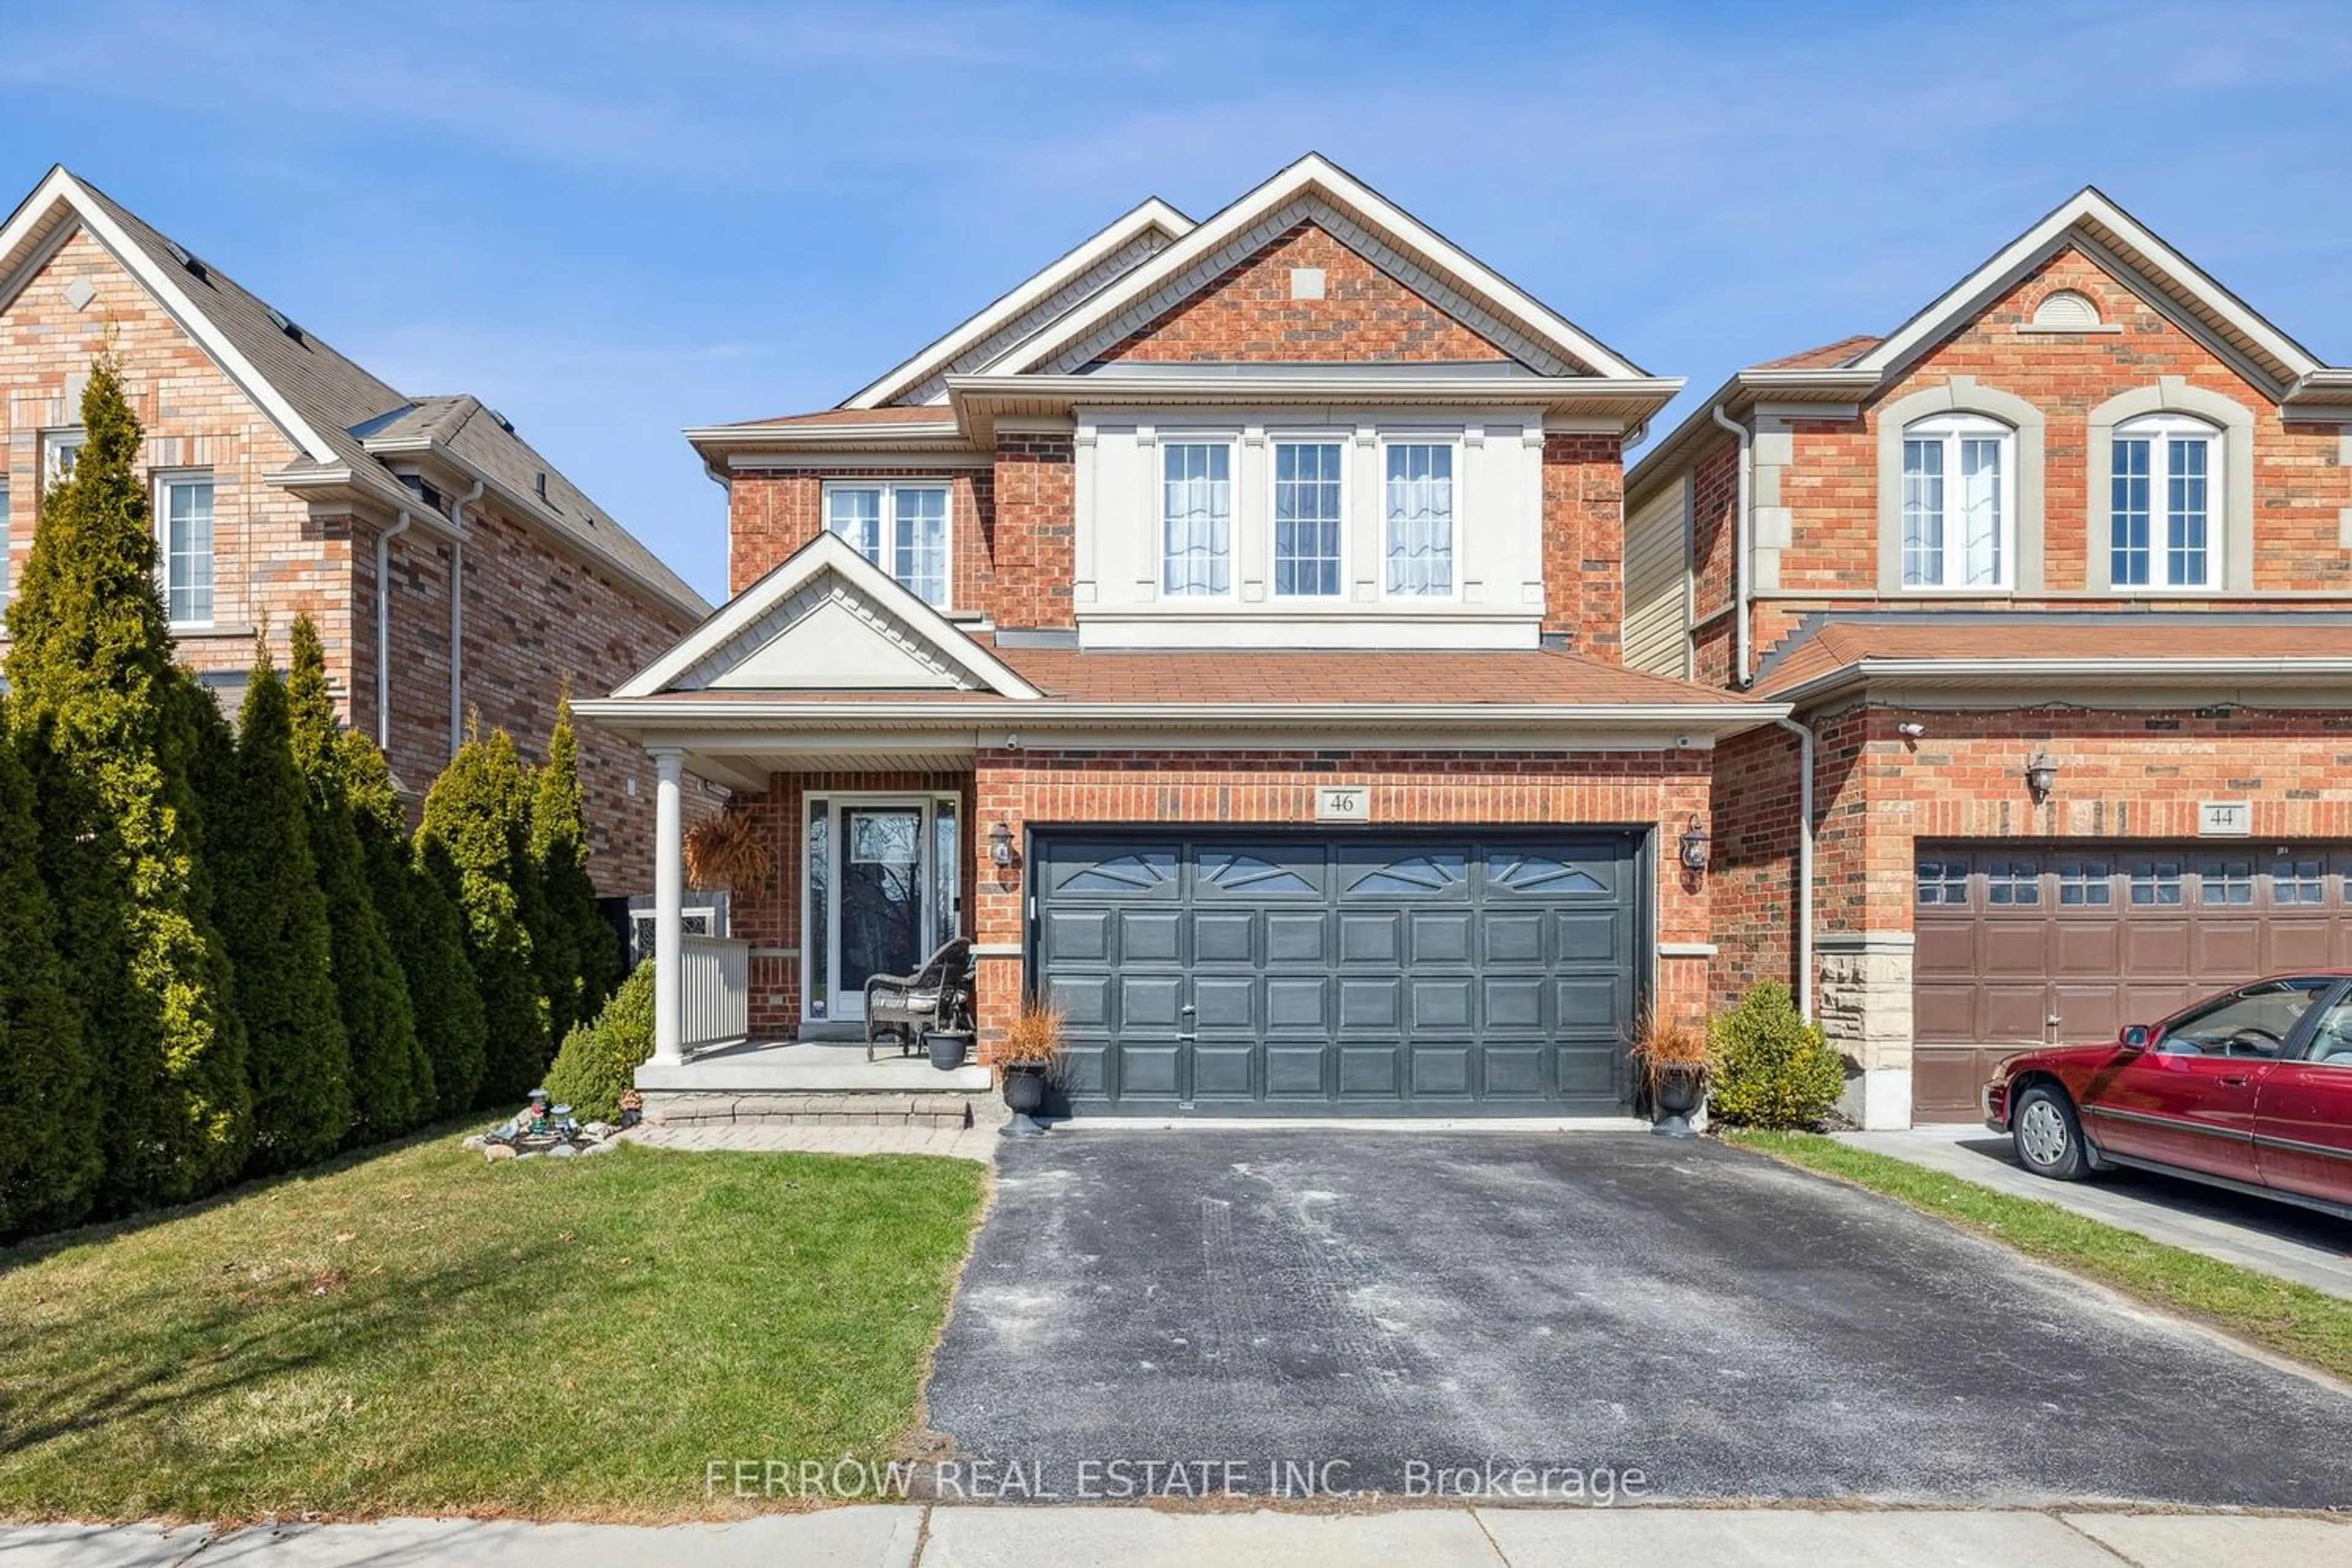 Home with brick exterior material for 46 Atherton Ave, Ajax Ontario L1T 4X6